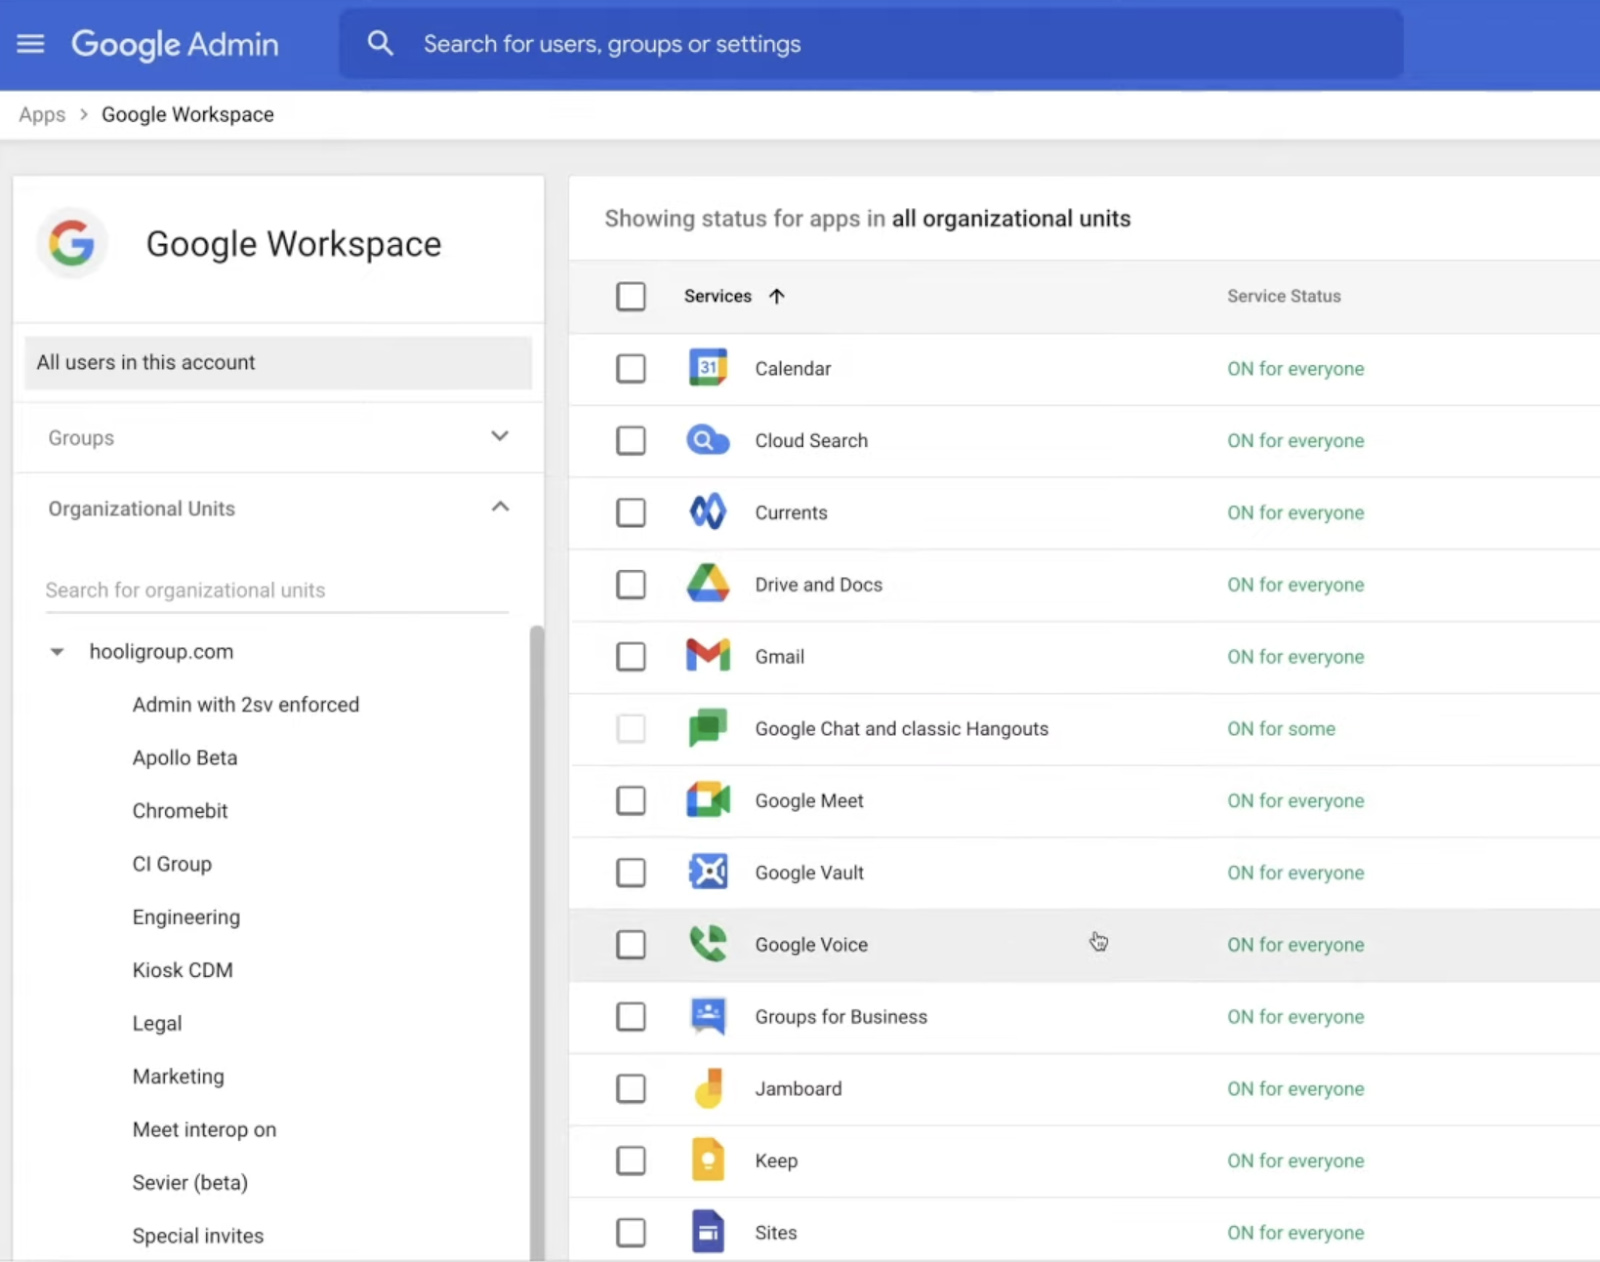 An image containing the list of Google Workspace apps.